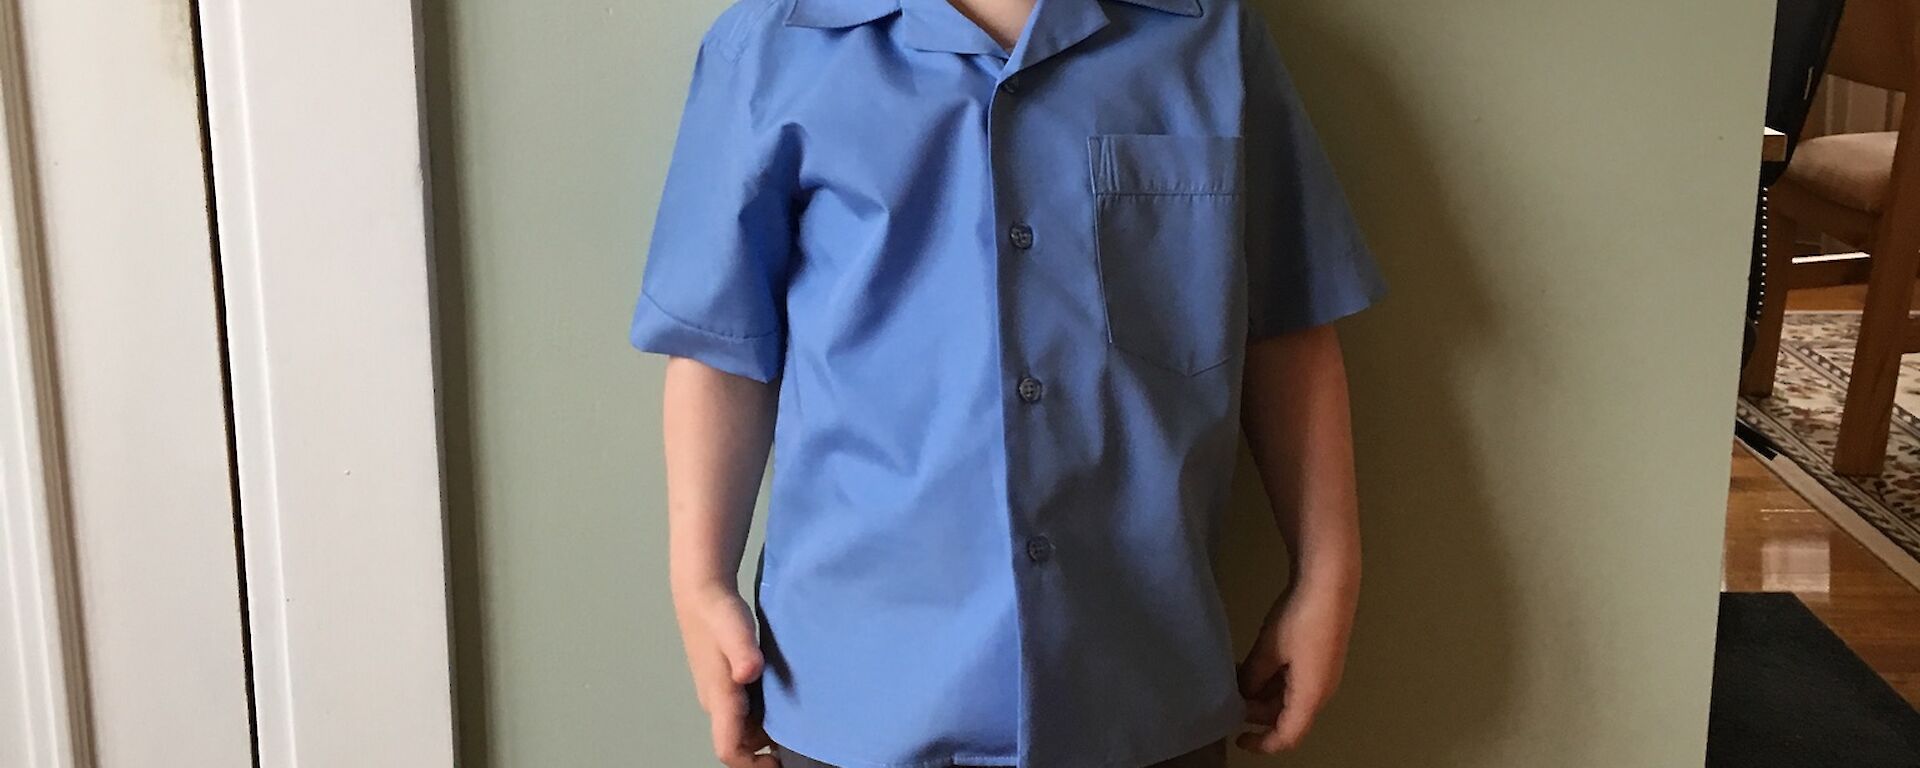 Scott’s son Daniel ready for his first day at school standing against a wall all dressed up